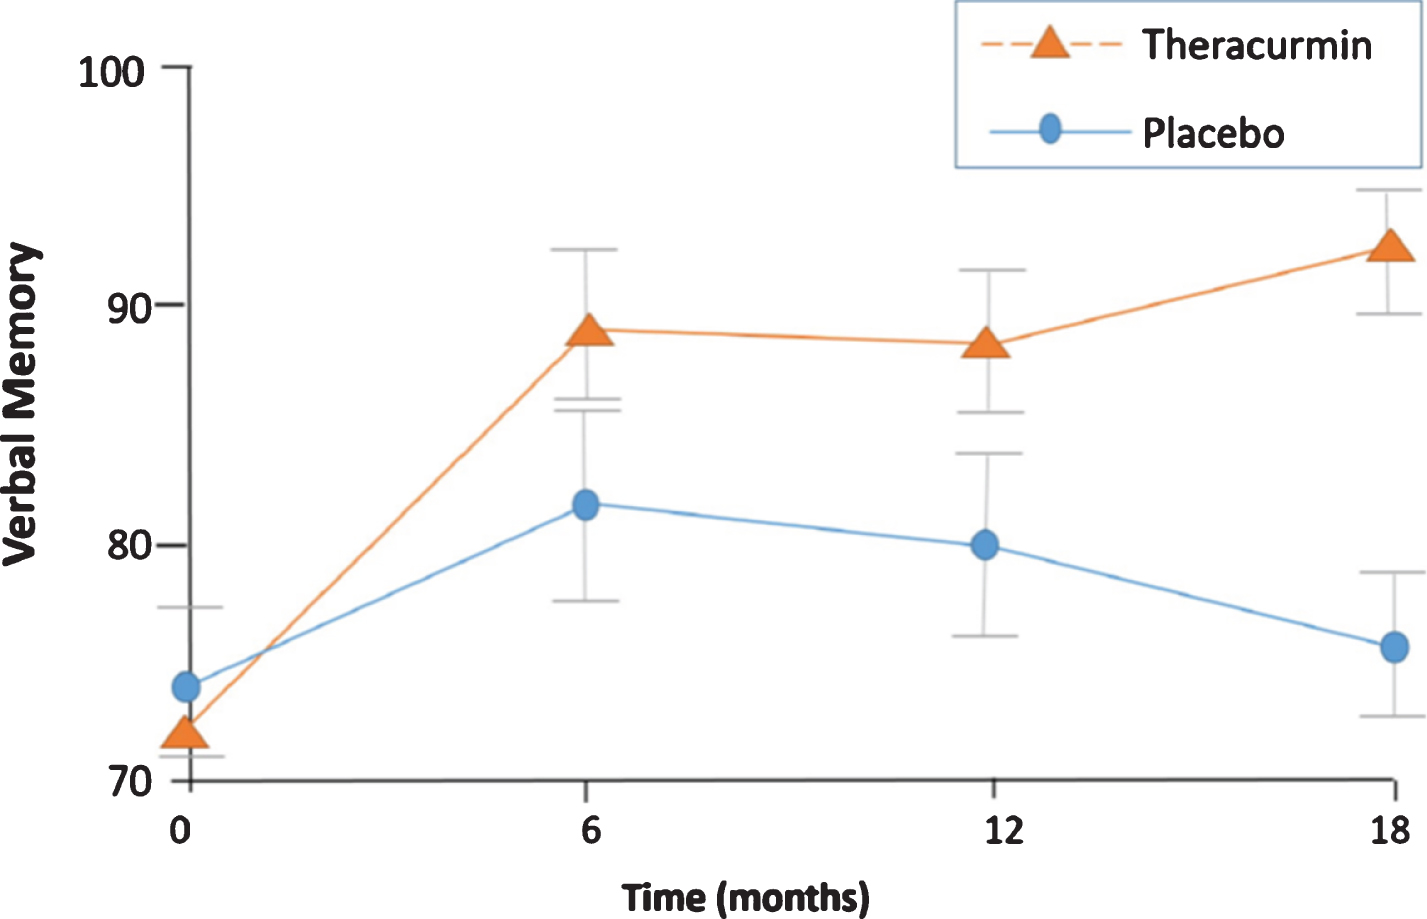 For the primary verbal memory outcome measure (Buschke SRT, Consistent Long-Term Recall), the Theracurmin group showed significant improvement from baseline after 18 months of treatment (p = 0.002); the placebo group did not show significant change (p = 0.8), and between group differences were significant (p = 0.05) [22].